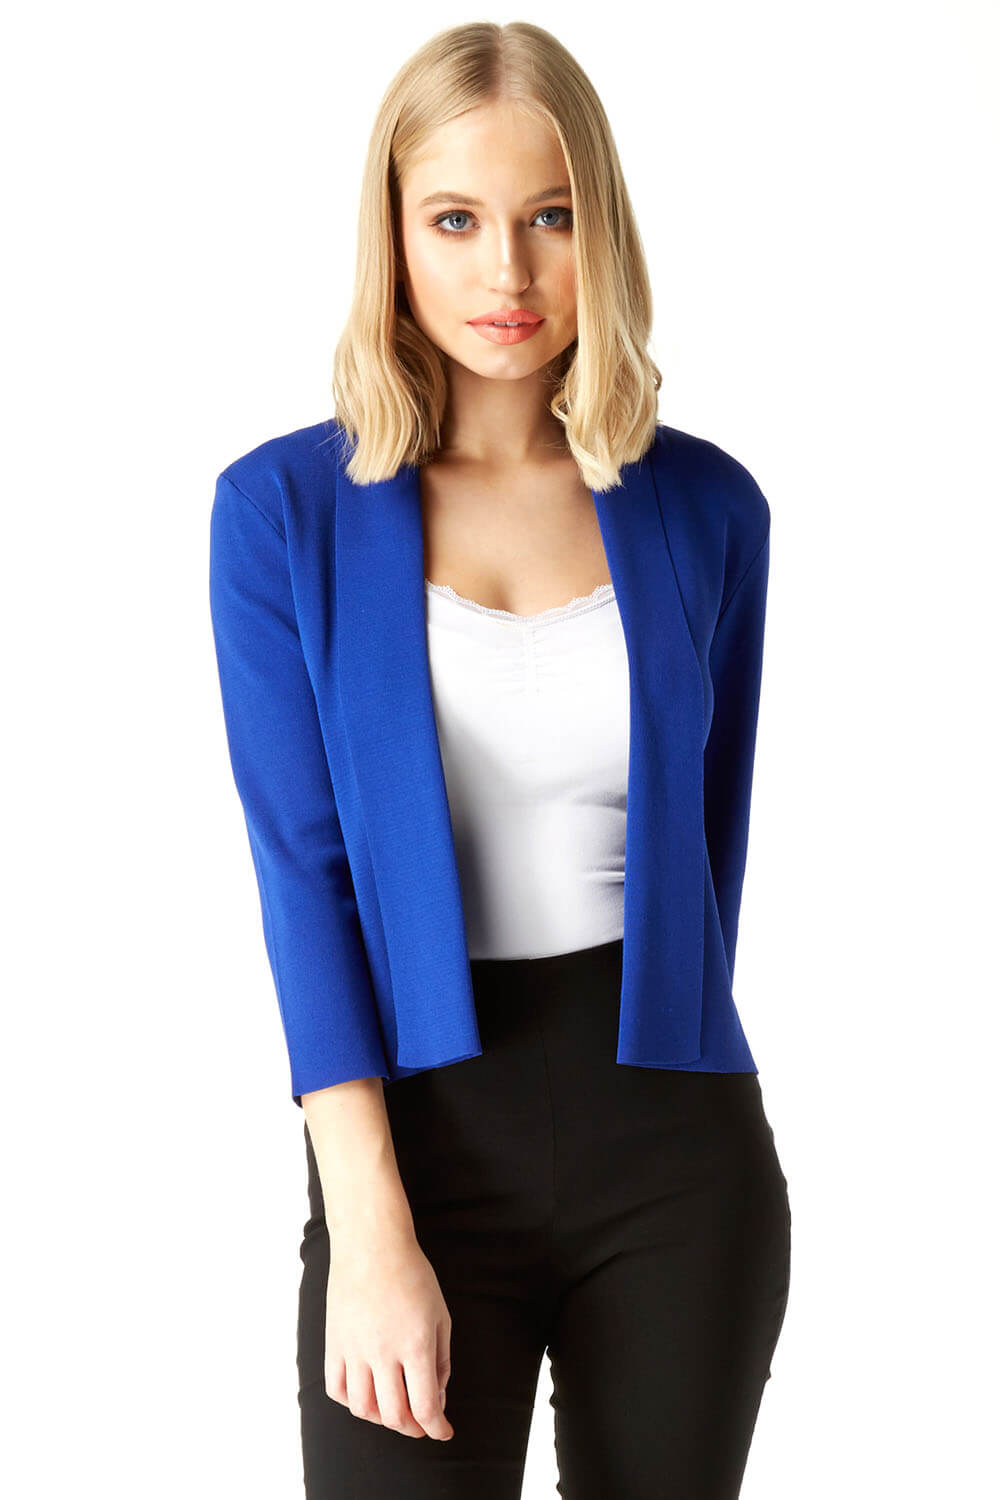 Cropped Knitted Shrug in Royal Blue - Roman Originals UK